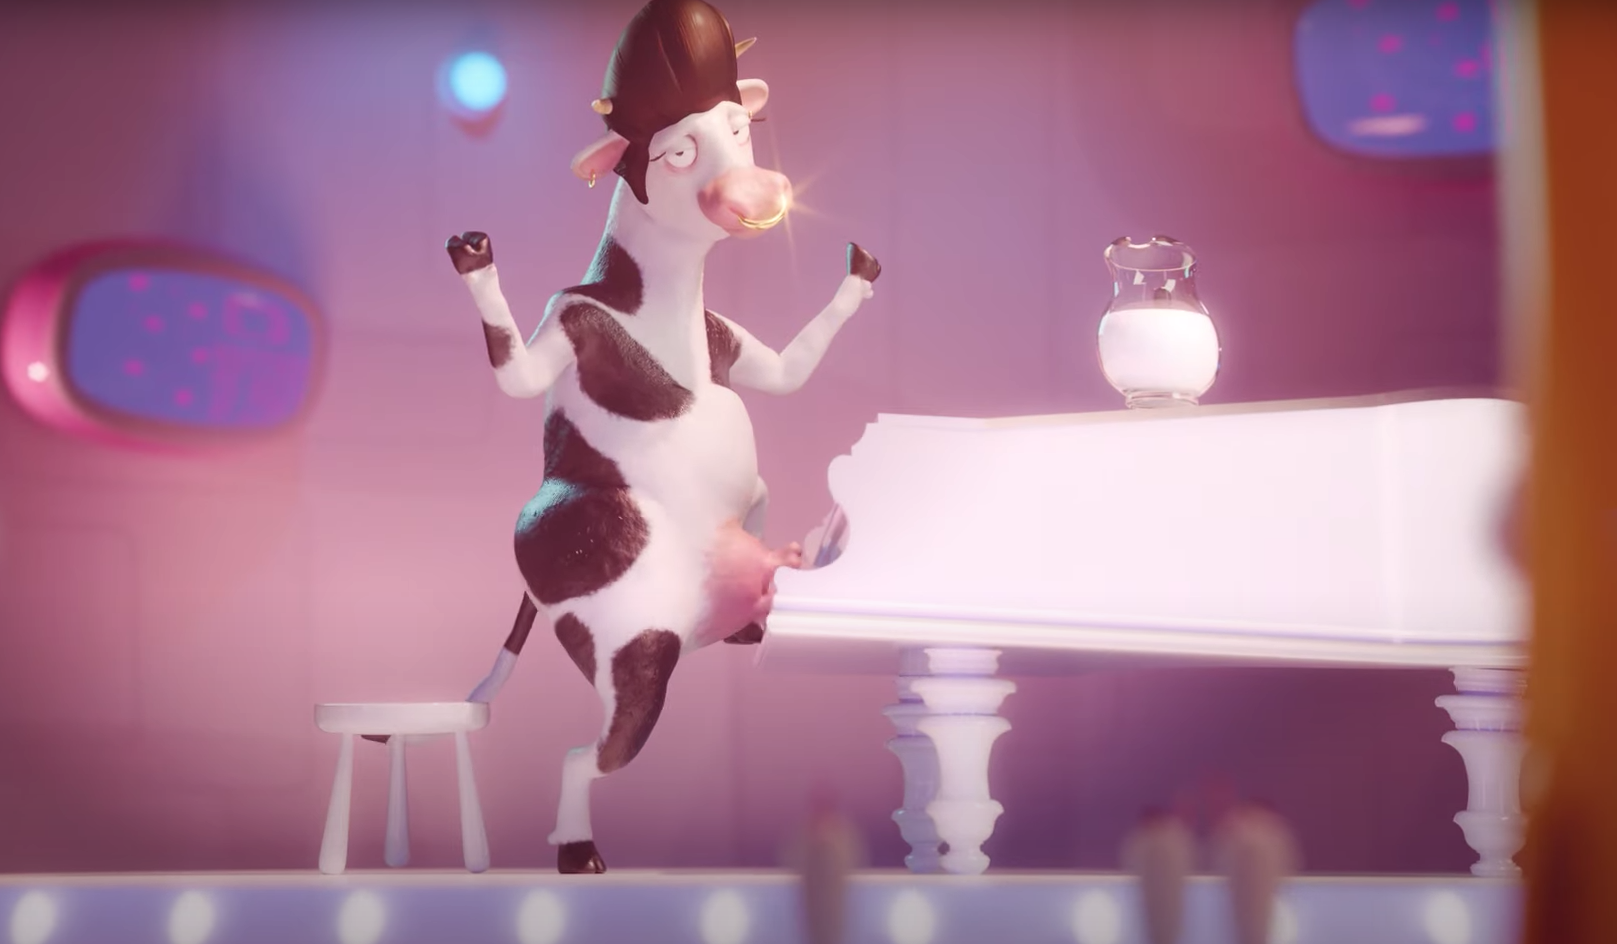 Mentos says it's 'Made From Awesome' in unusual animated spots